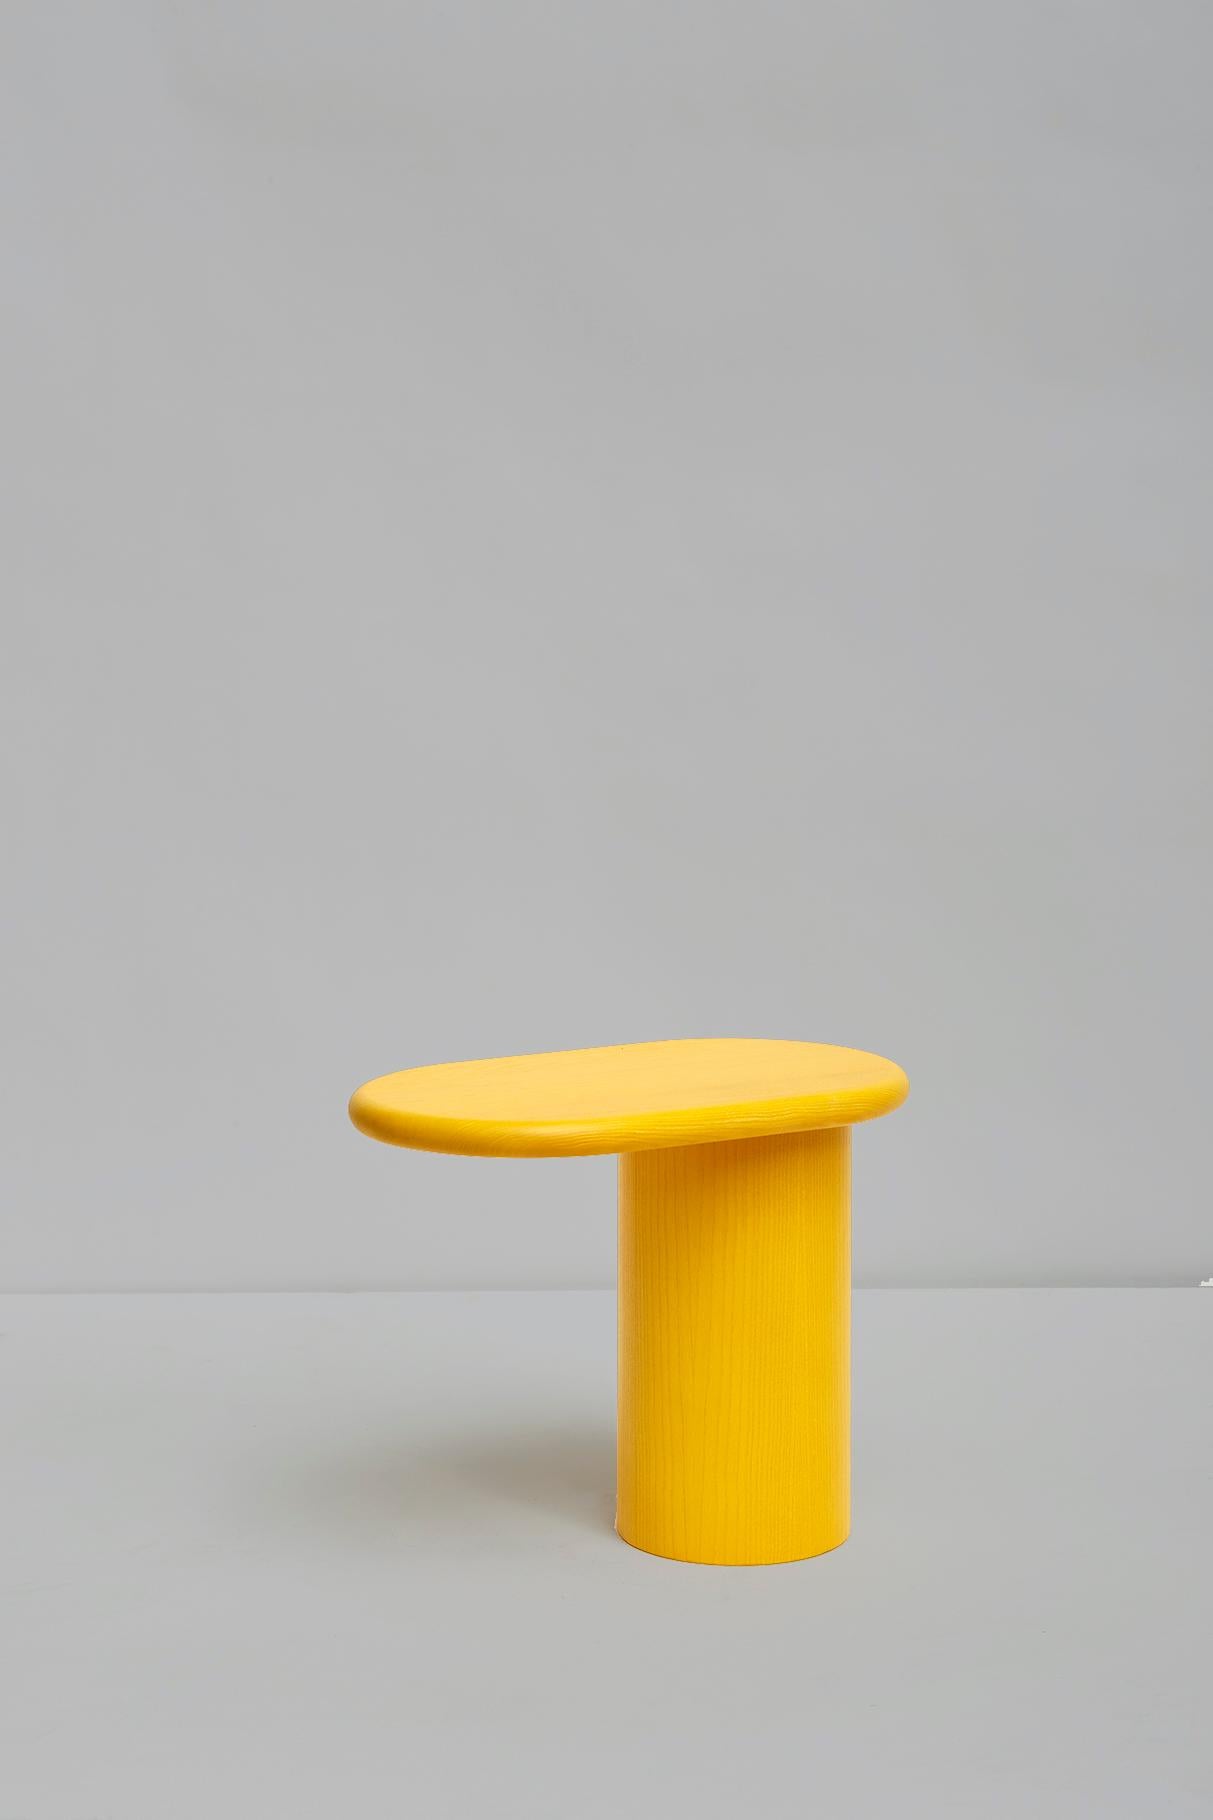 Cantilever Small, Side Table 
Design by Matteo Zorzenoni, product by Scapin Collezioni

Cantilever is a collection of small tables characterized by their visual imbalance created because its cantilevered top is supported by a small base. Designed in